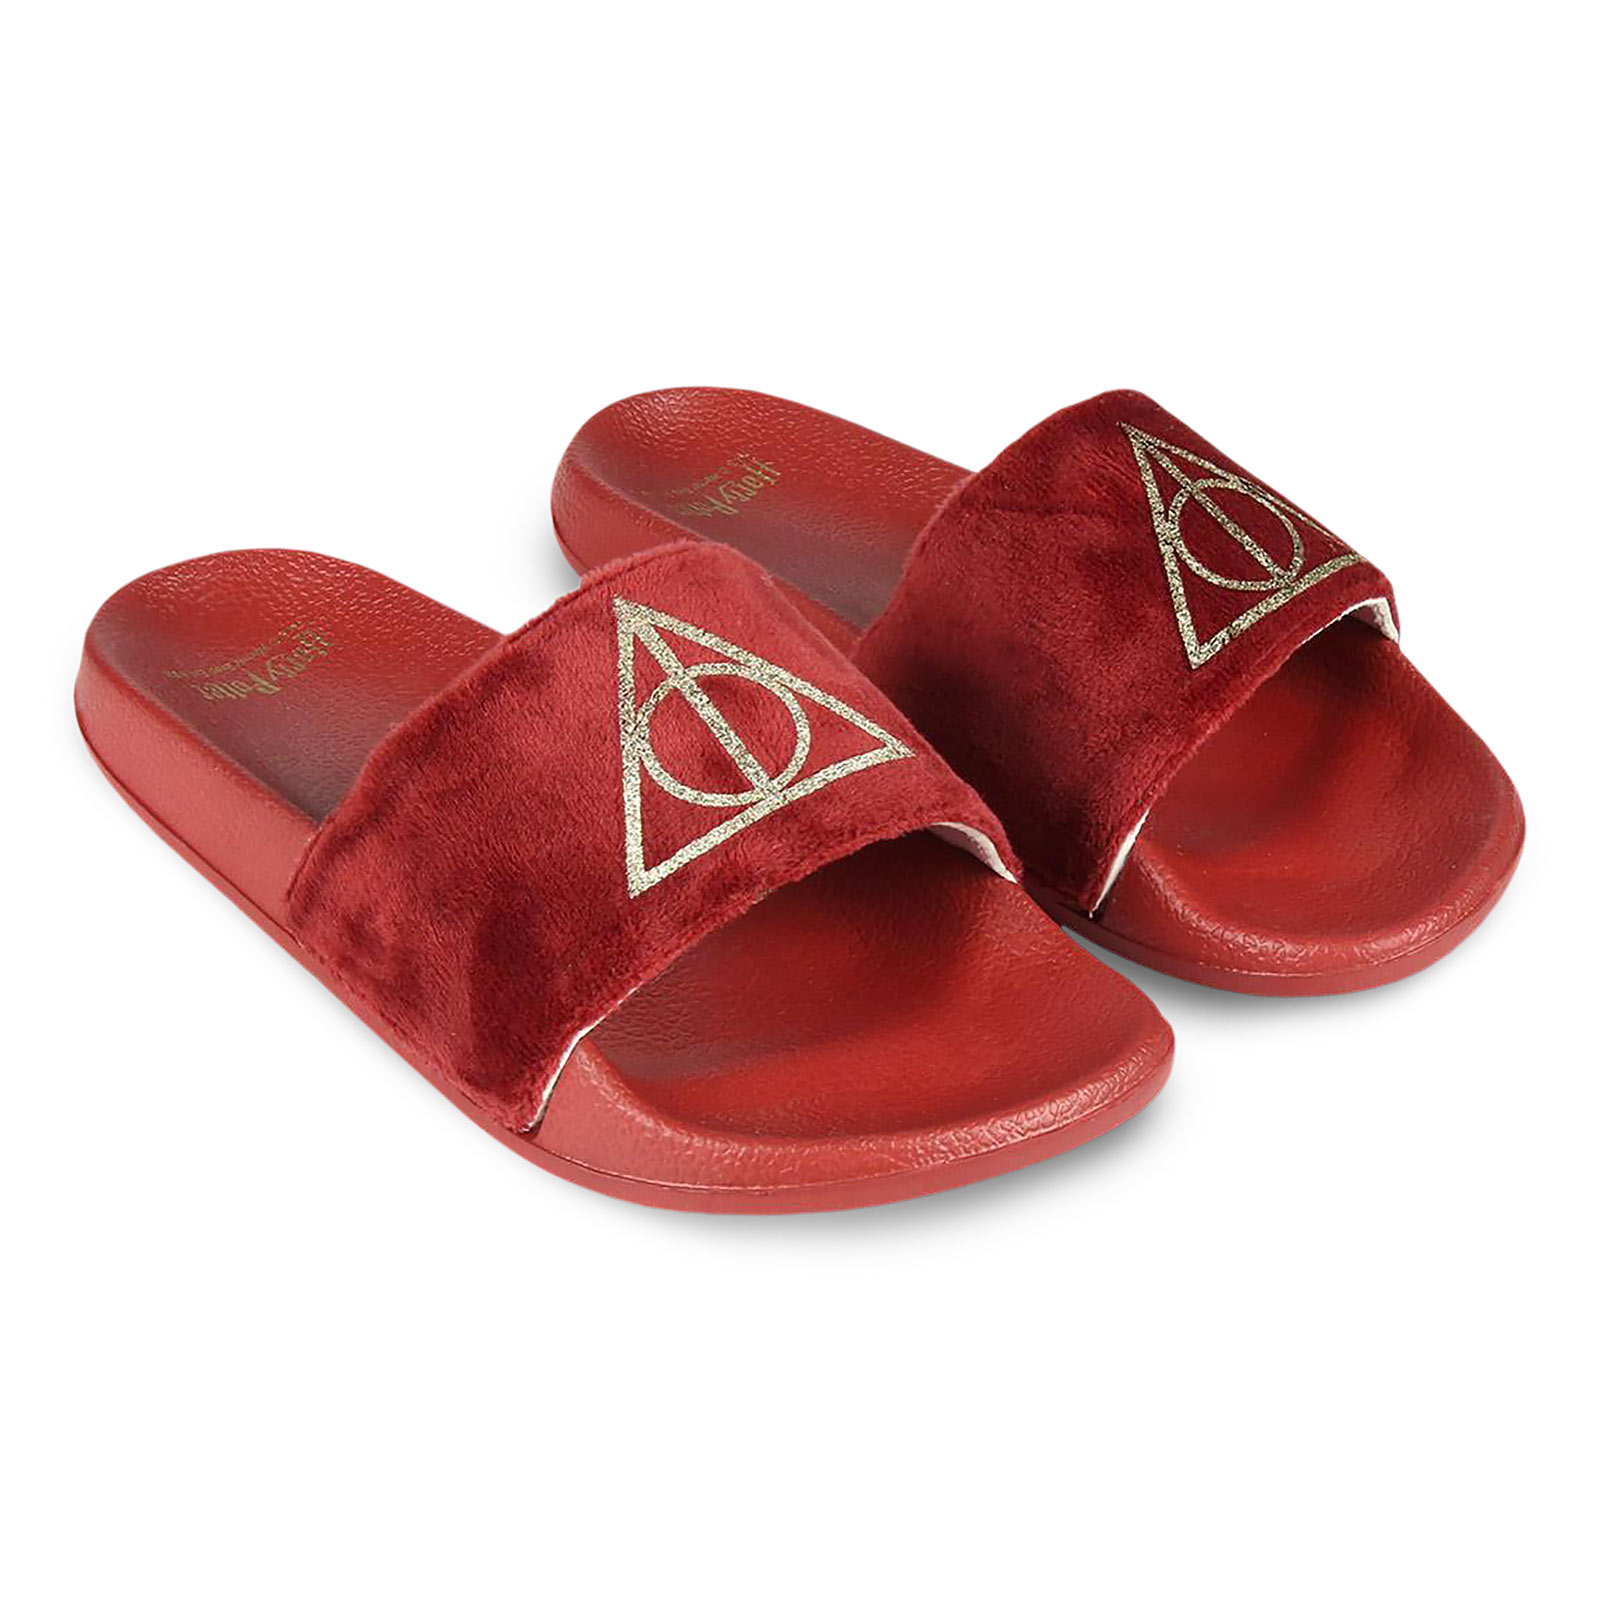 Harry Potter - Deathly Hallows Slippers